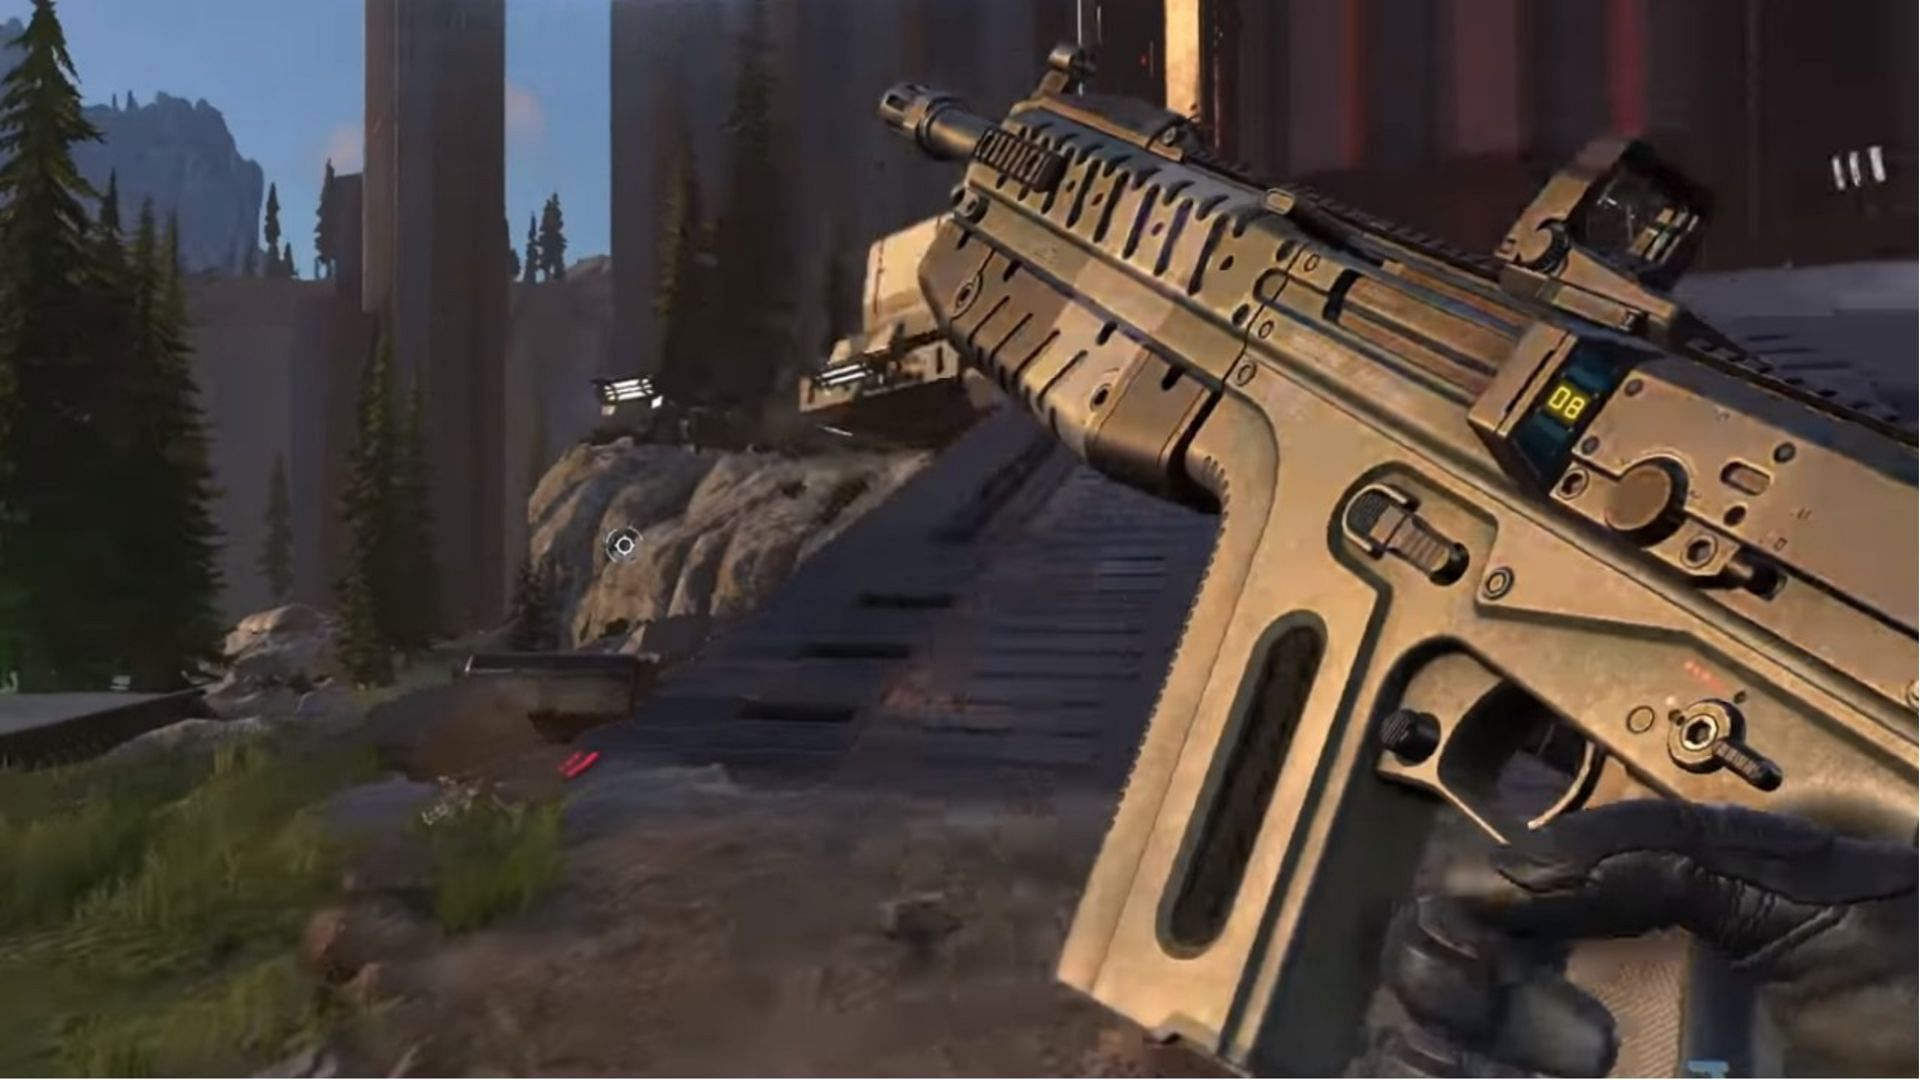 A new Forge leak suggests players will be able to customize weapon abilities (Image via 343 Industries)